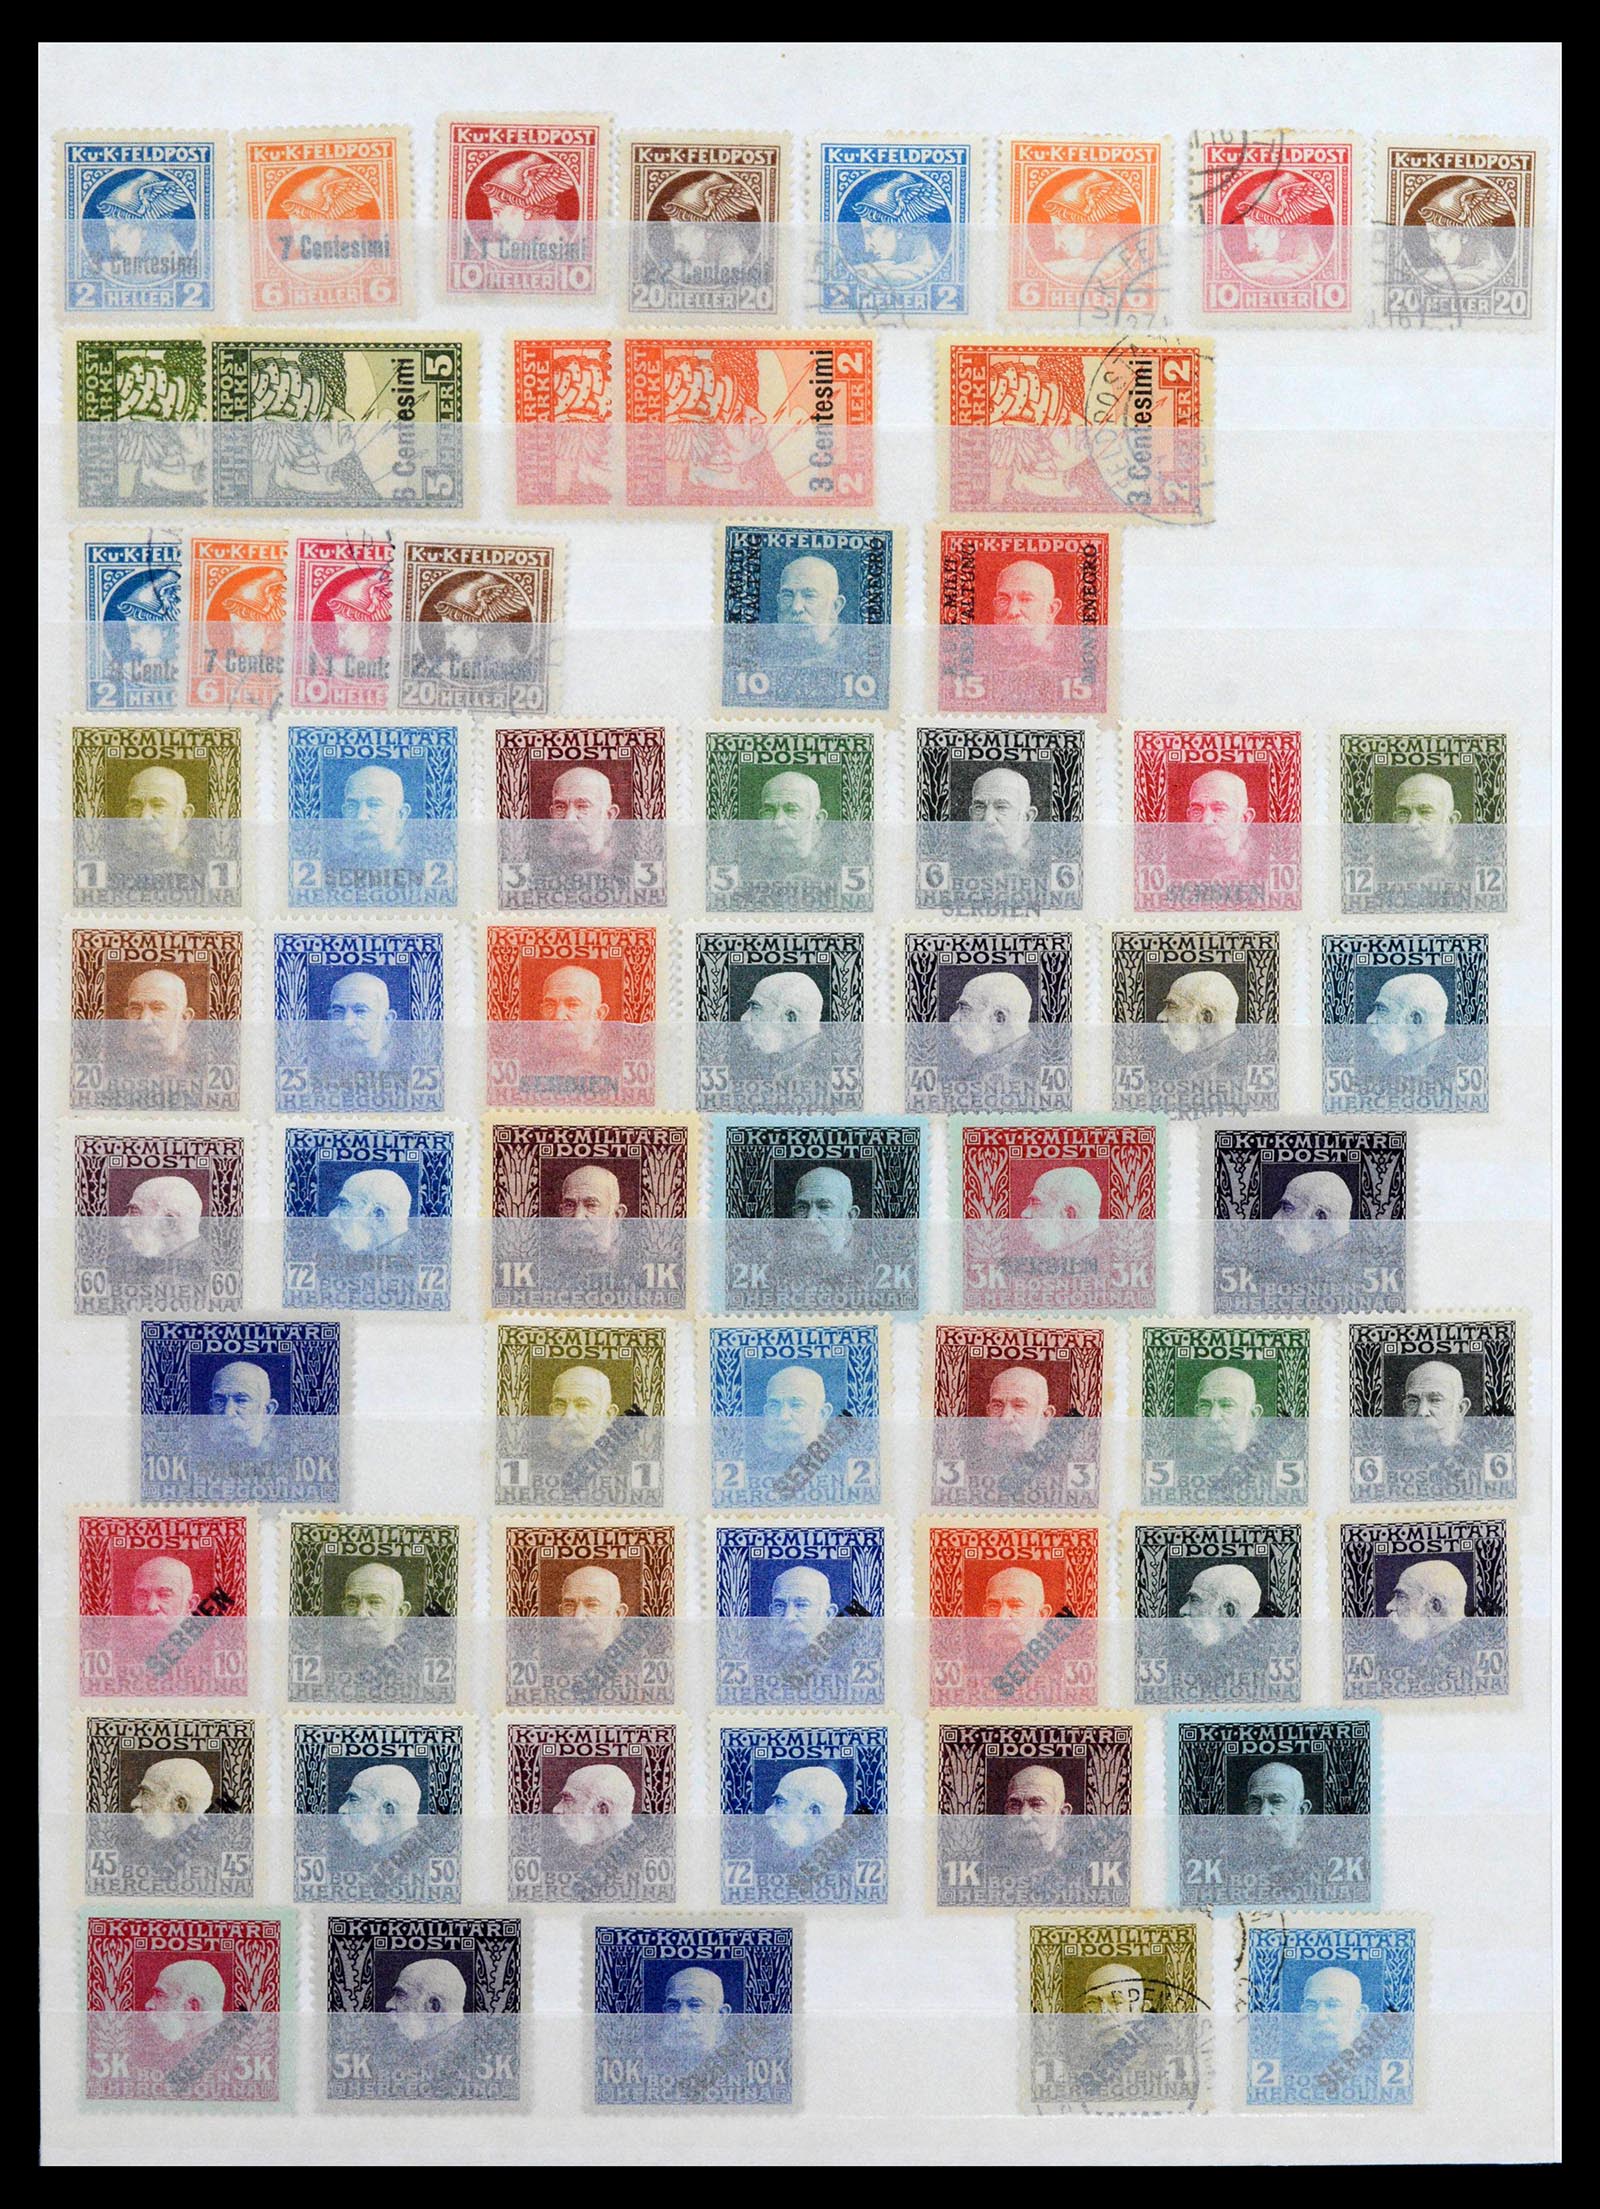 39044 0006 - Stamp collection 39044 European countries 1900-1945.